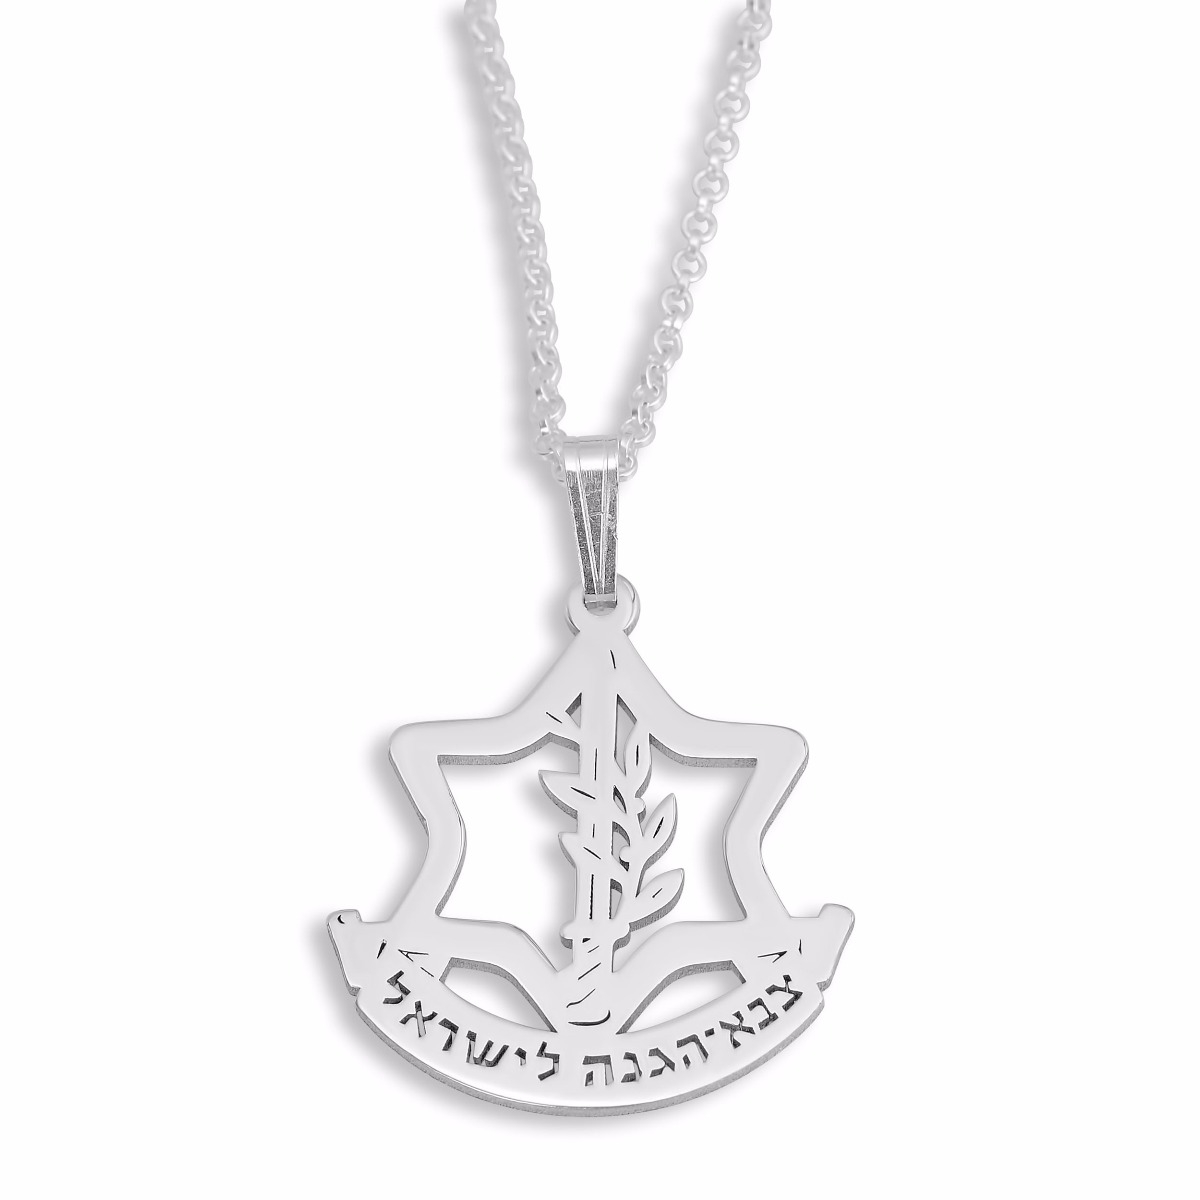 Israeli Defense Forces Necklace - Silver or Gold Plated - Hebrew / English - 1